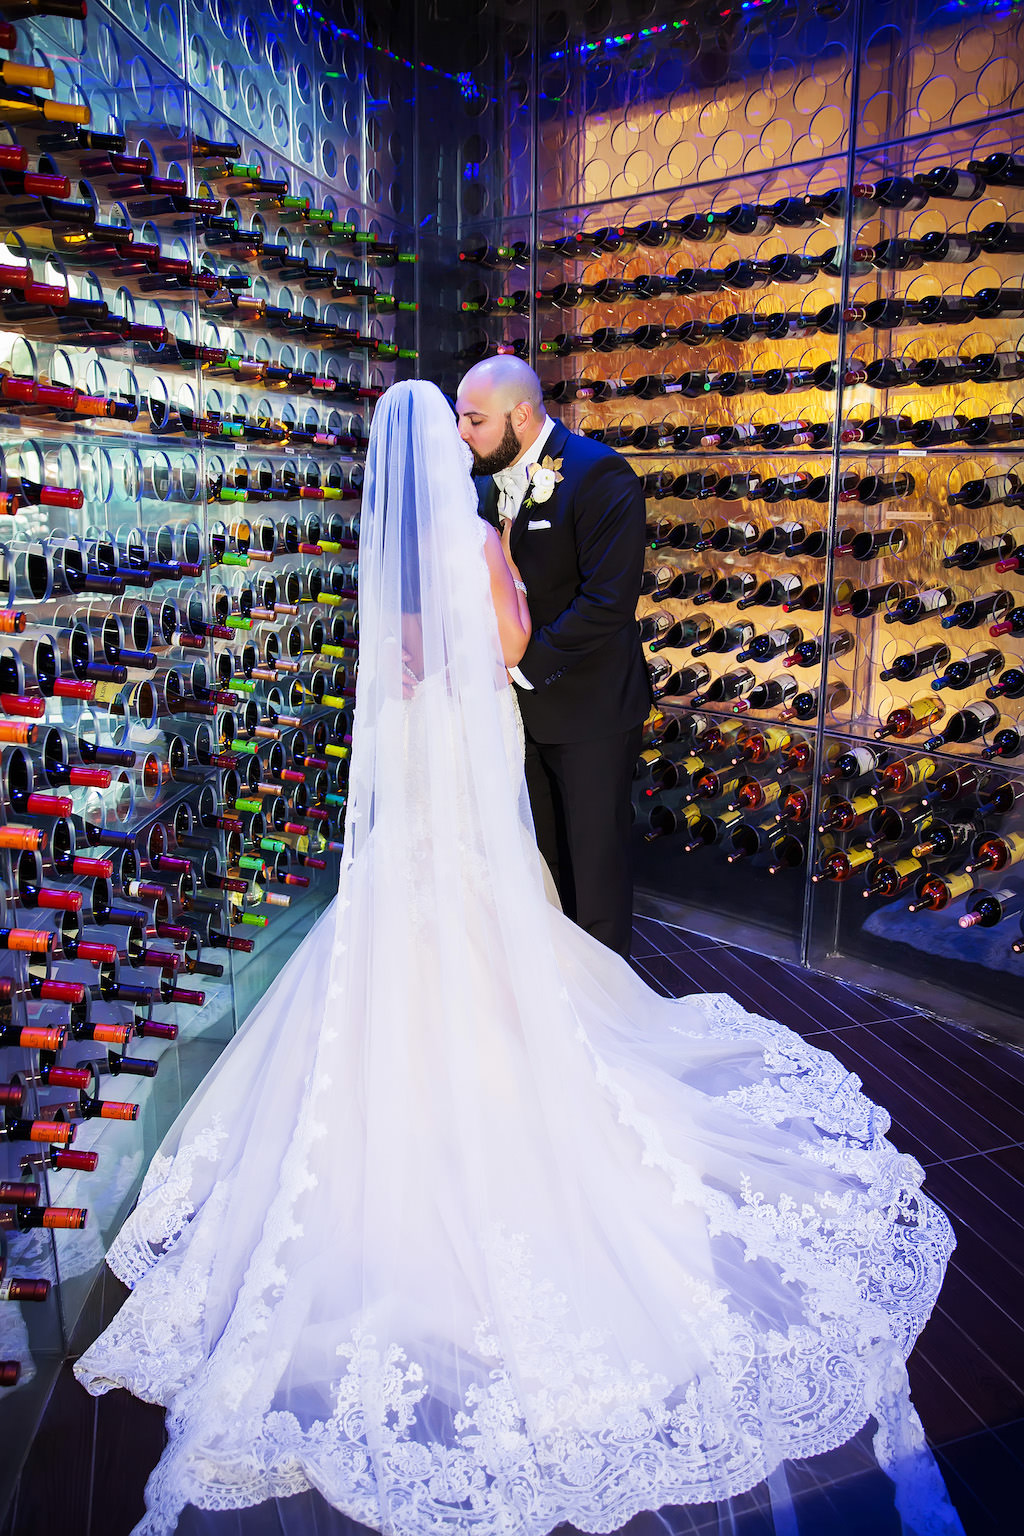 Bride and Groom Wedding Portrait in Wine Cellar, Bride in Cathedral Length Lace Trimmed Veil | Luxury Hotel Wedding Venue The Westin Tampa Bay